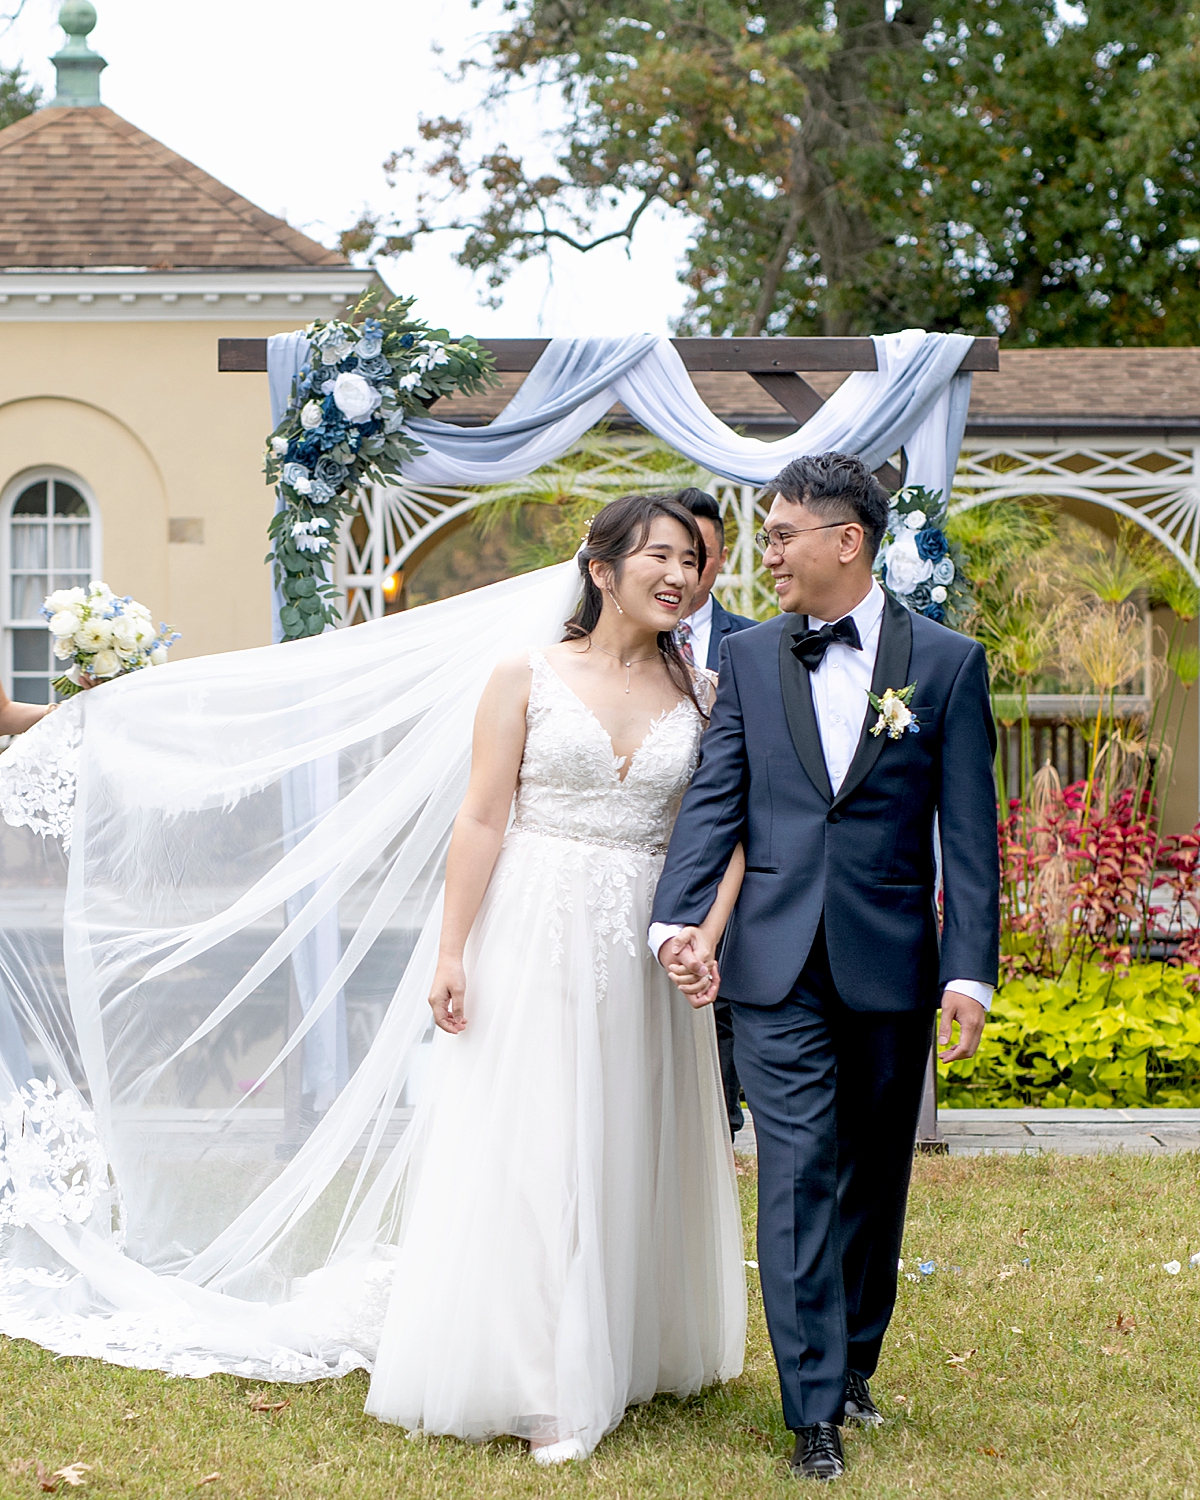 The Belmont Manor, a charming Maryland wedding venue